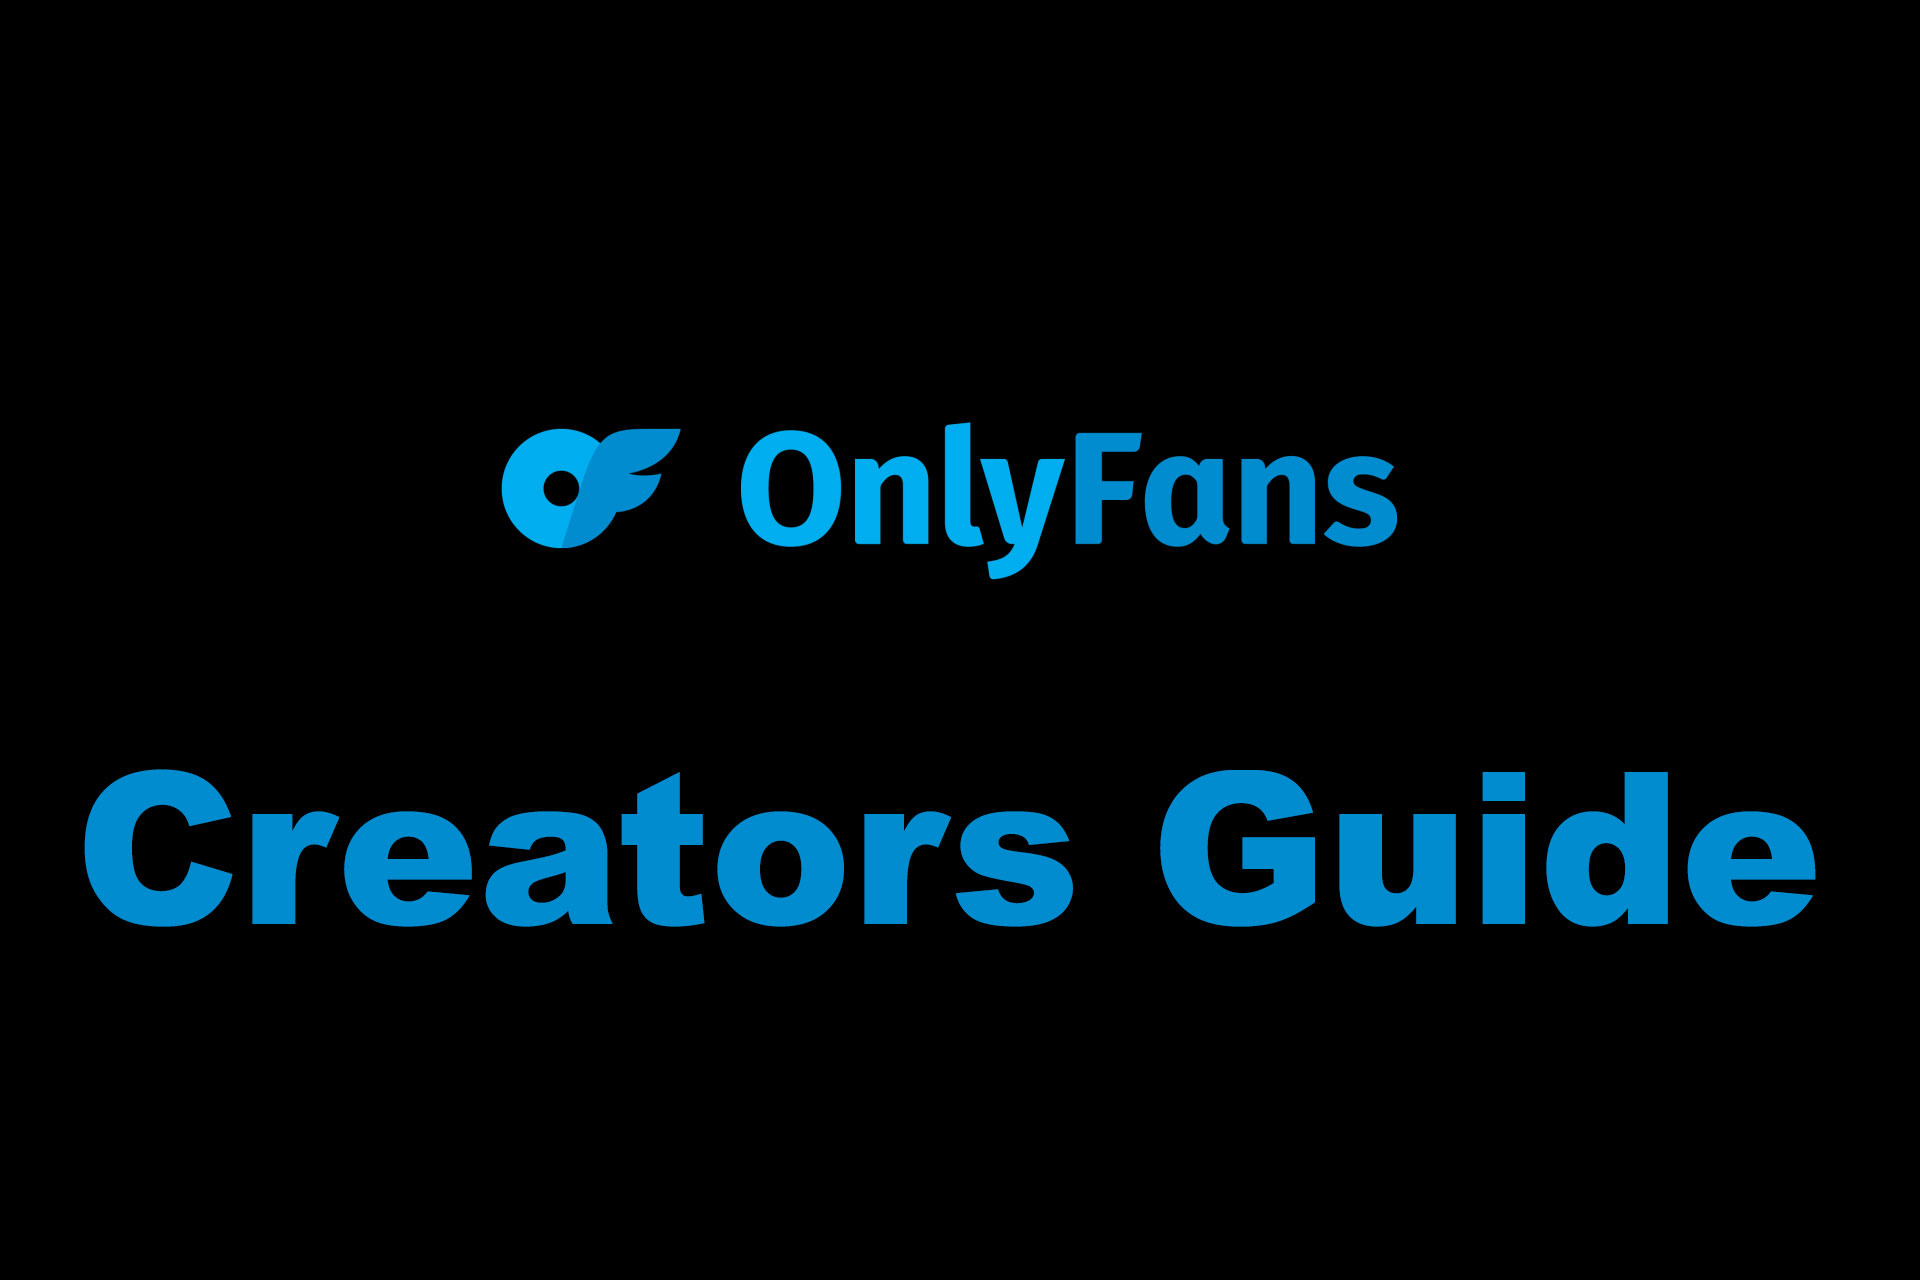 Onlyfans Creators Guide